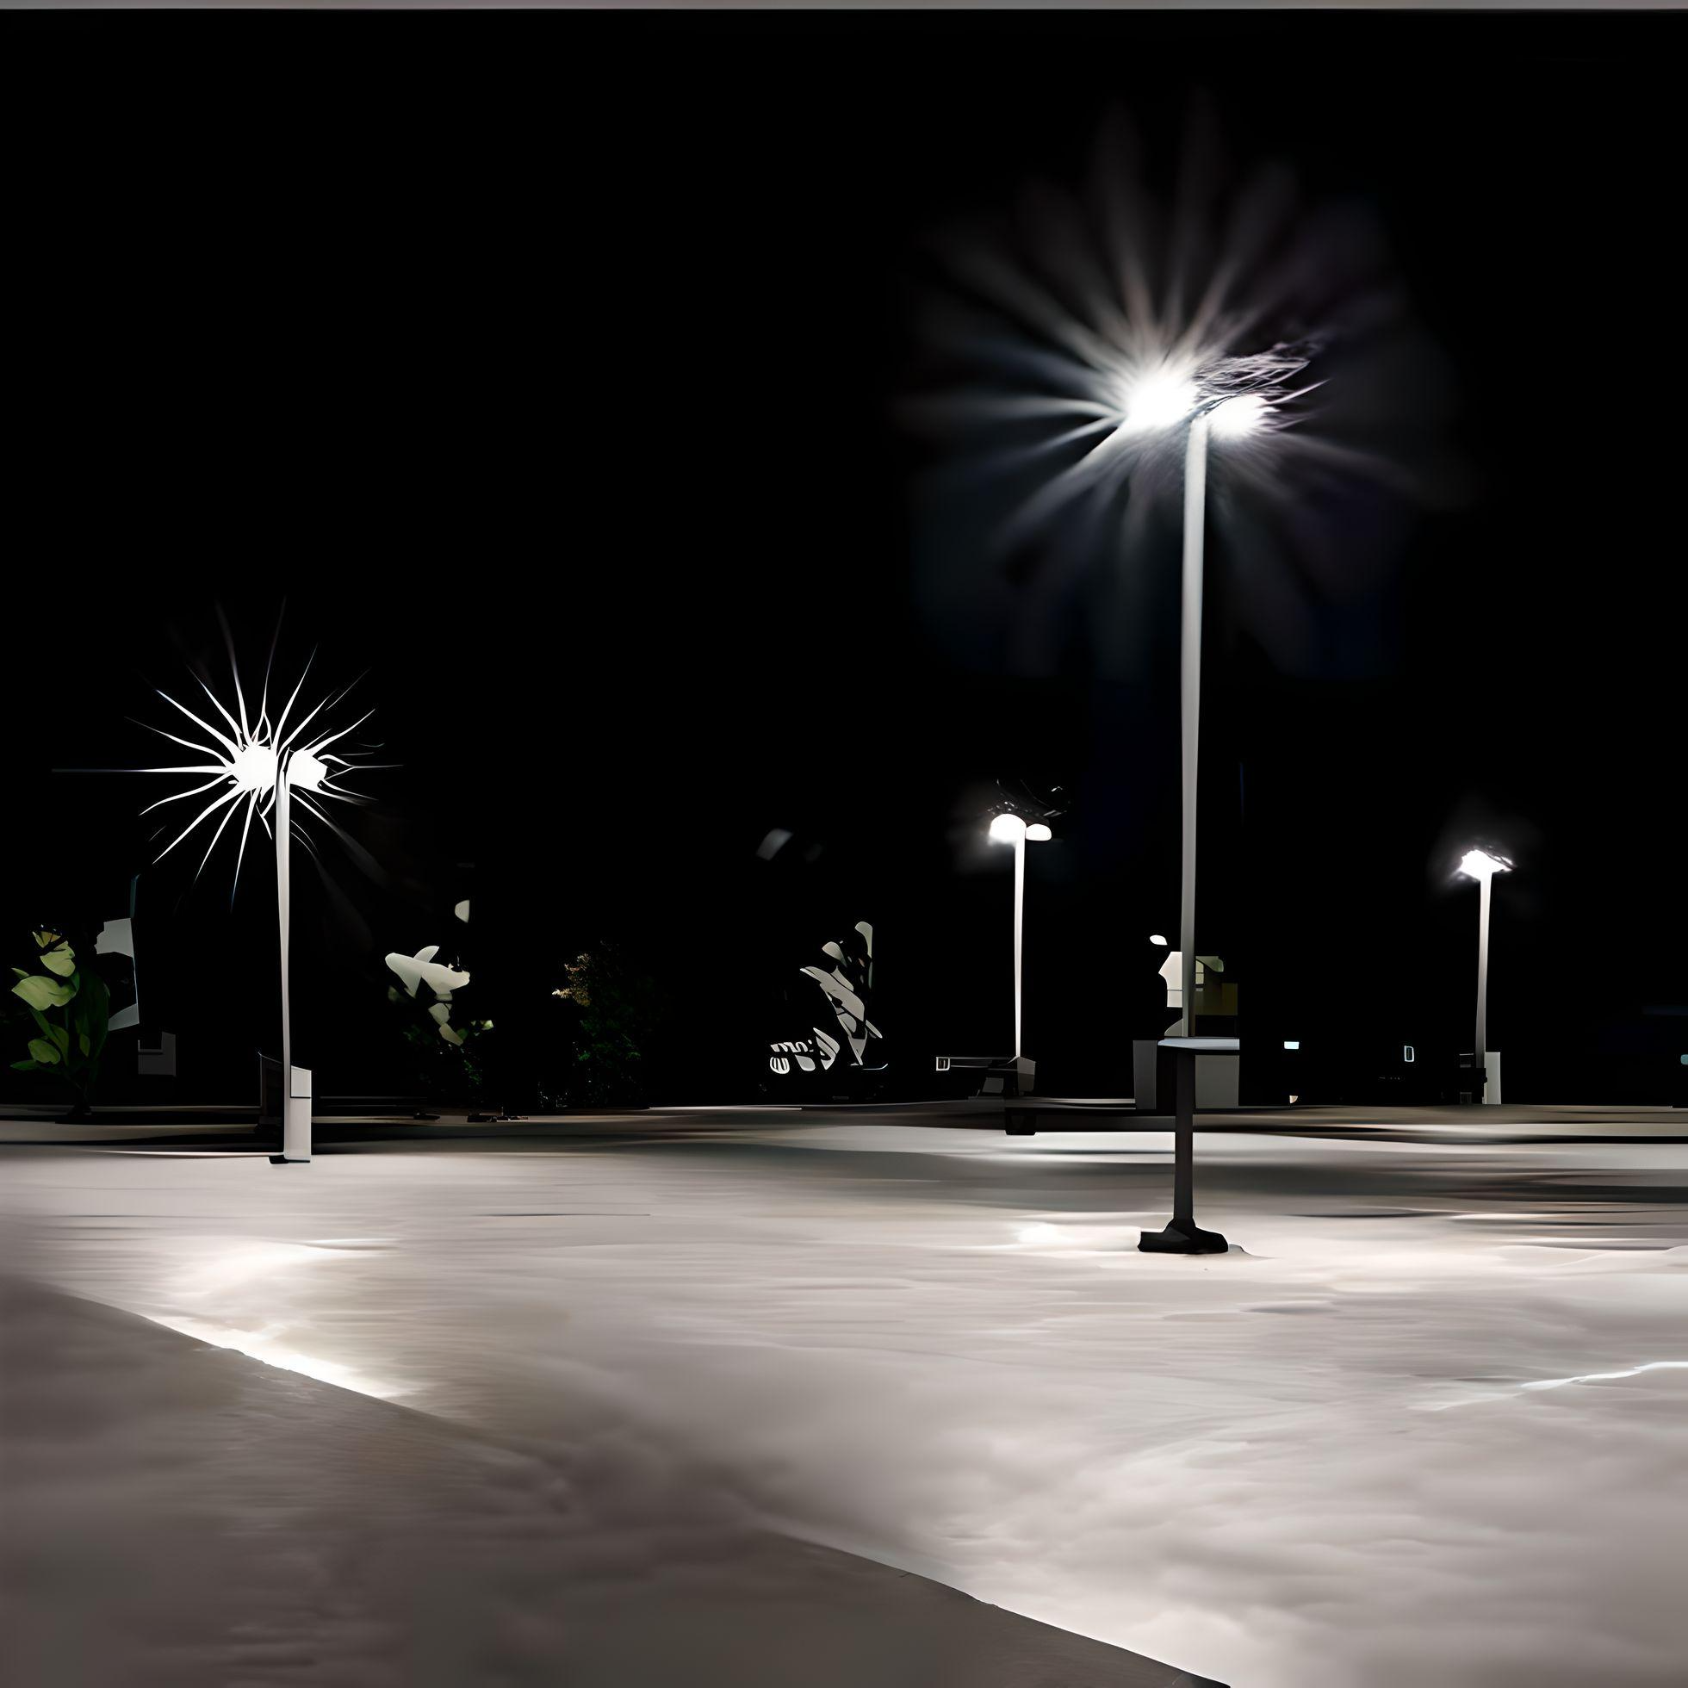 Shop the Best Outdoor LED Lighting for Gardens, Patios, and Pathways - Affordable, Durable, and Energy-Efficient Solutions Available Now